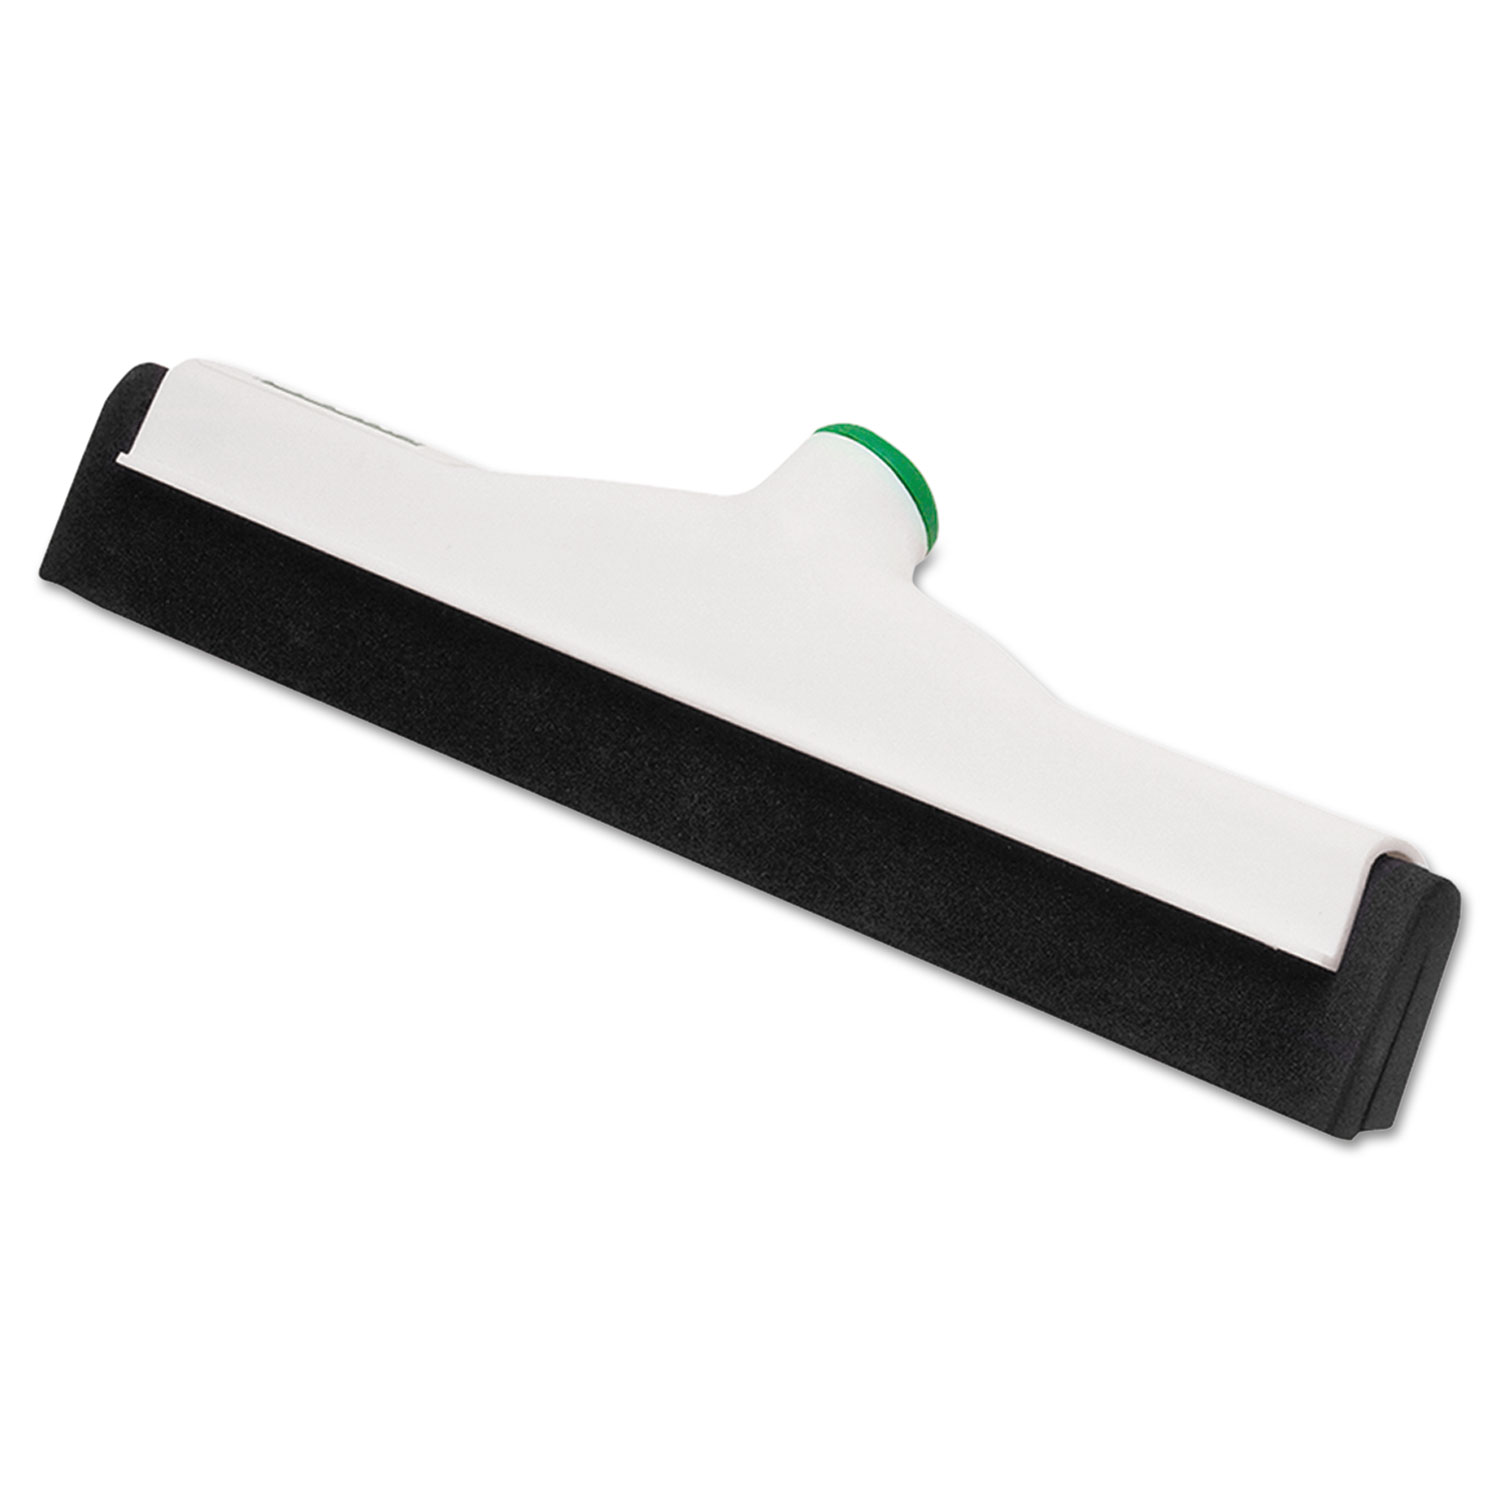  Unger PM45A Sanitary Standard Floor Squeegee, 18 Wide Blade, White Plastic/Black Rubber (UNGPM45A) 